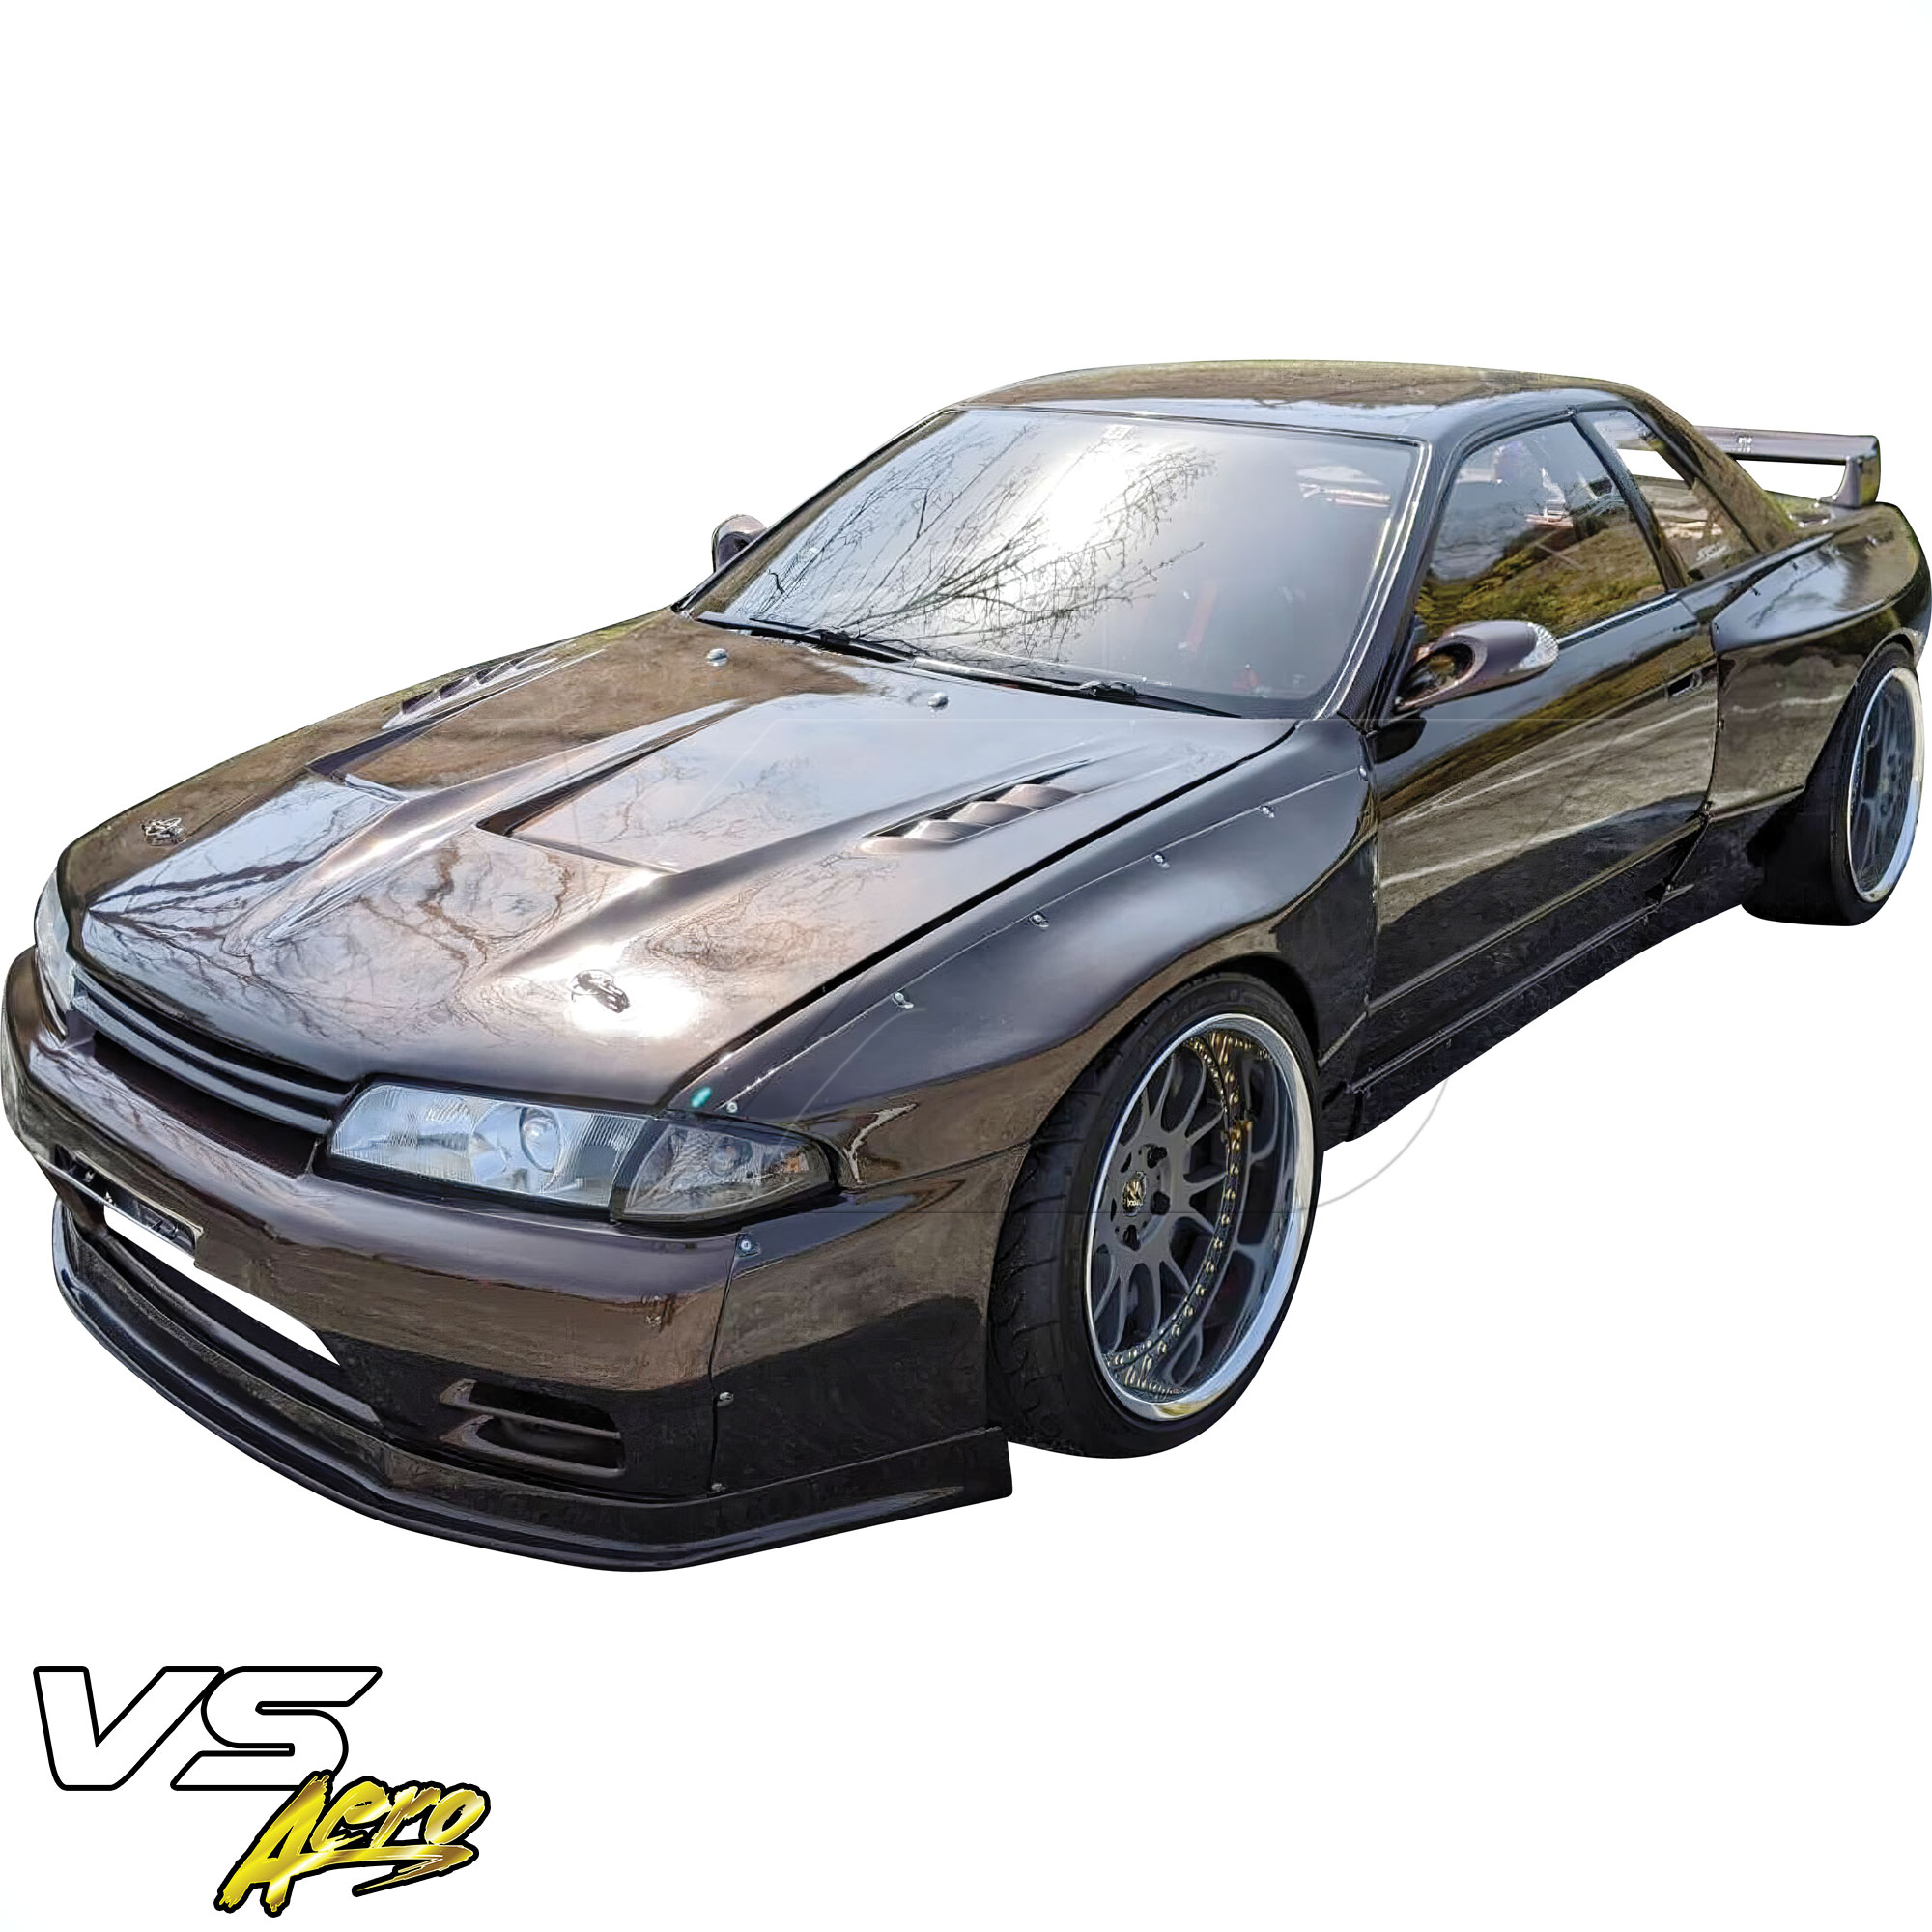 VSaero FRP TKYO Wide Body 40mm Fender Flares (front) 4pc > Nissan Skyline R32 1990-1994 > 2dr Coupe - Image 11